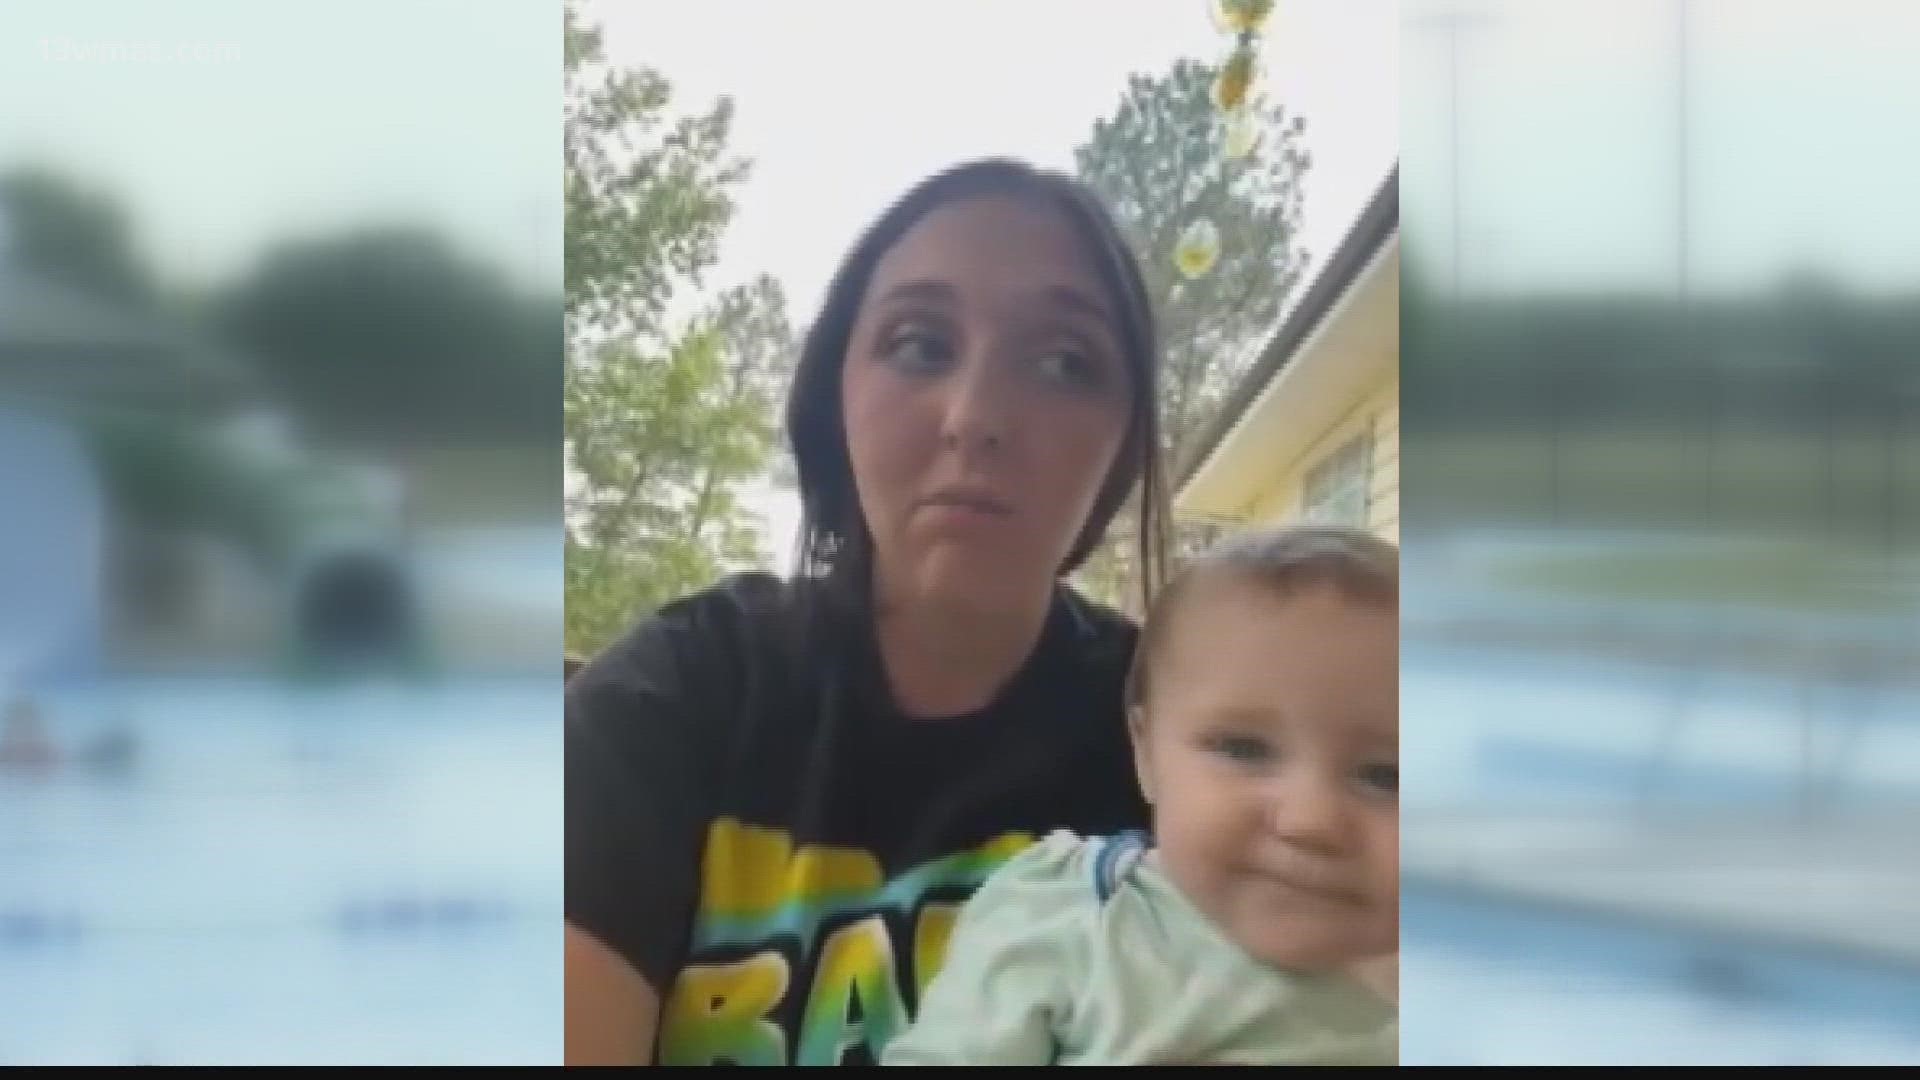 Two sisters at Southern Pines Water Park say an employee told them to cover up while they nursed their babies or leave the park.